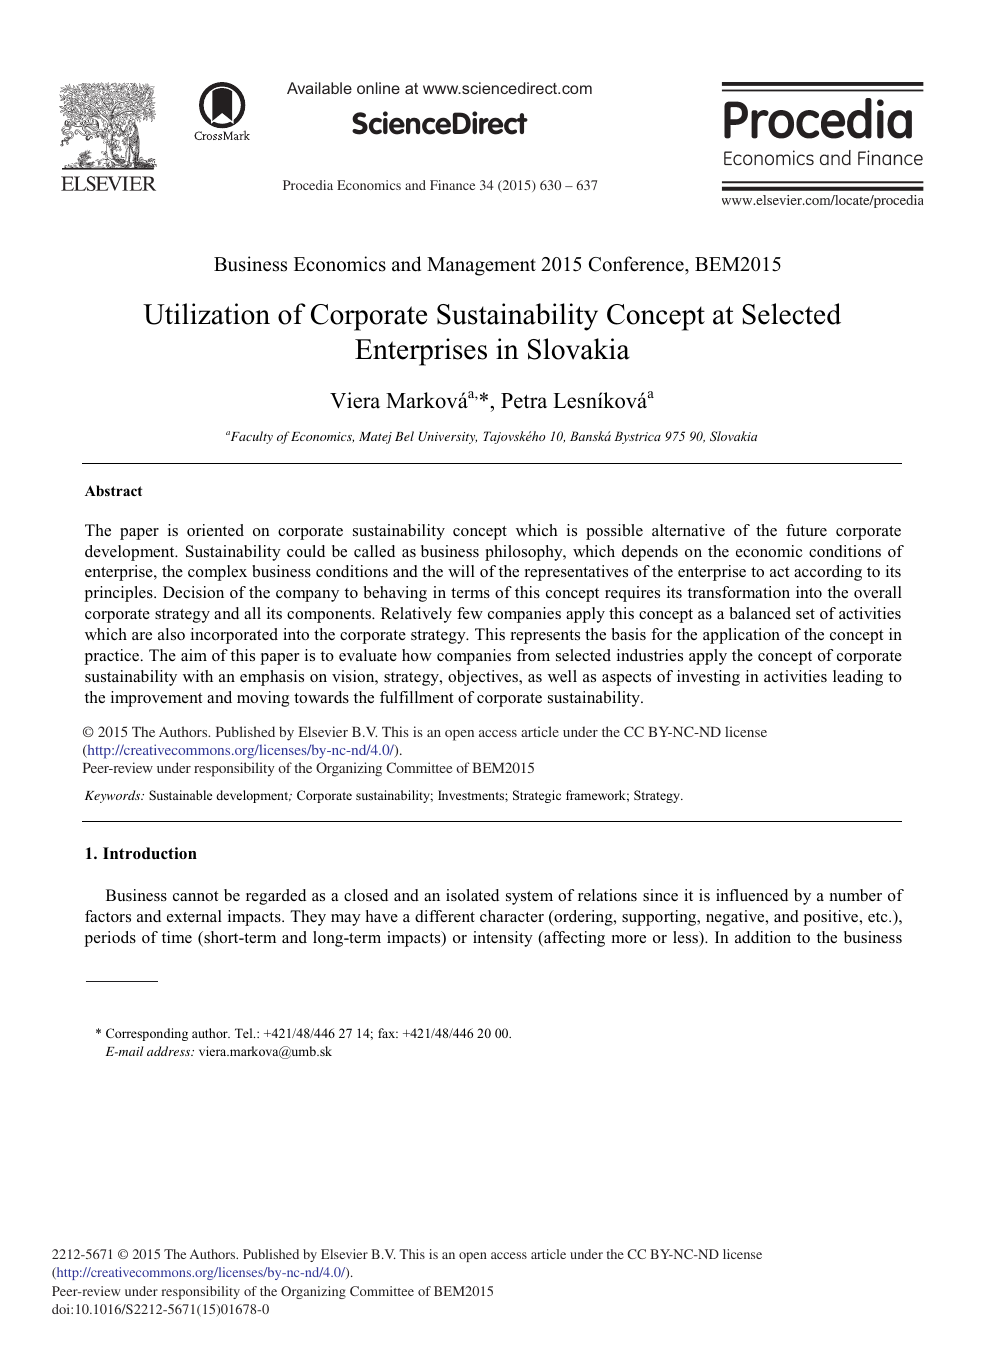 Utilization Of Corporate Sustainability Concept At Selected Enterprises In Slovakia Topic Of Research Paper In Economics And Business Download Scholarly Article Pdf And Read For Free On Cyberleninka Open Science Hub